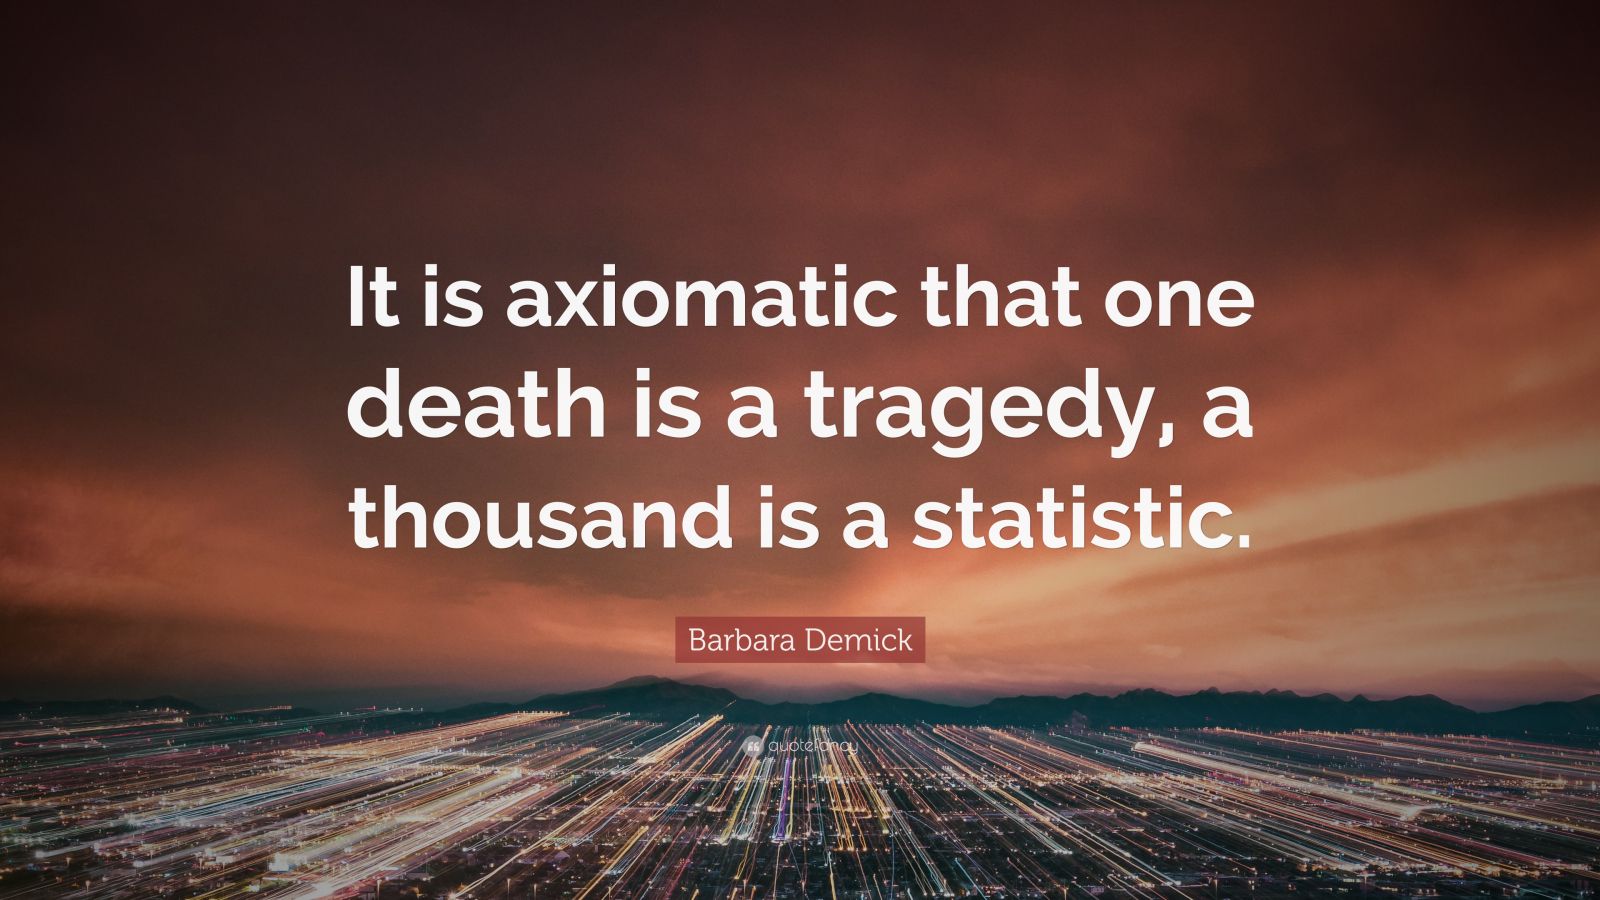 Barbara Demick Quote: “It is axiomatic that one death is a tragedy, a ...